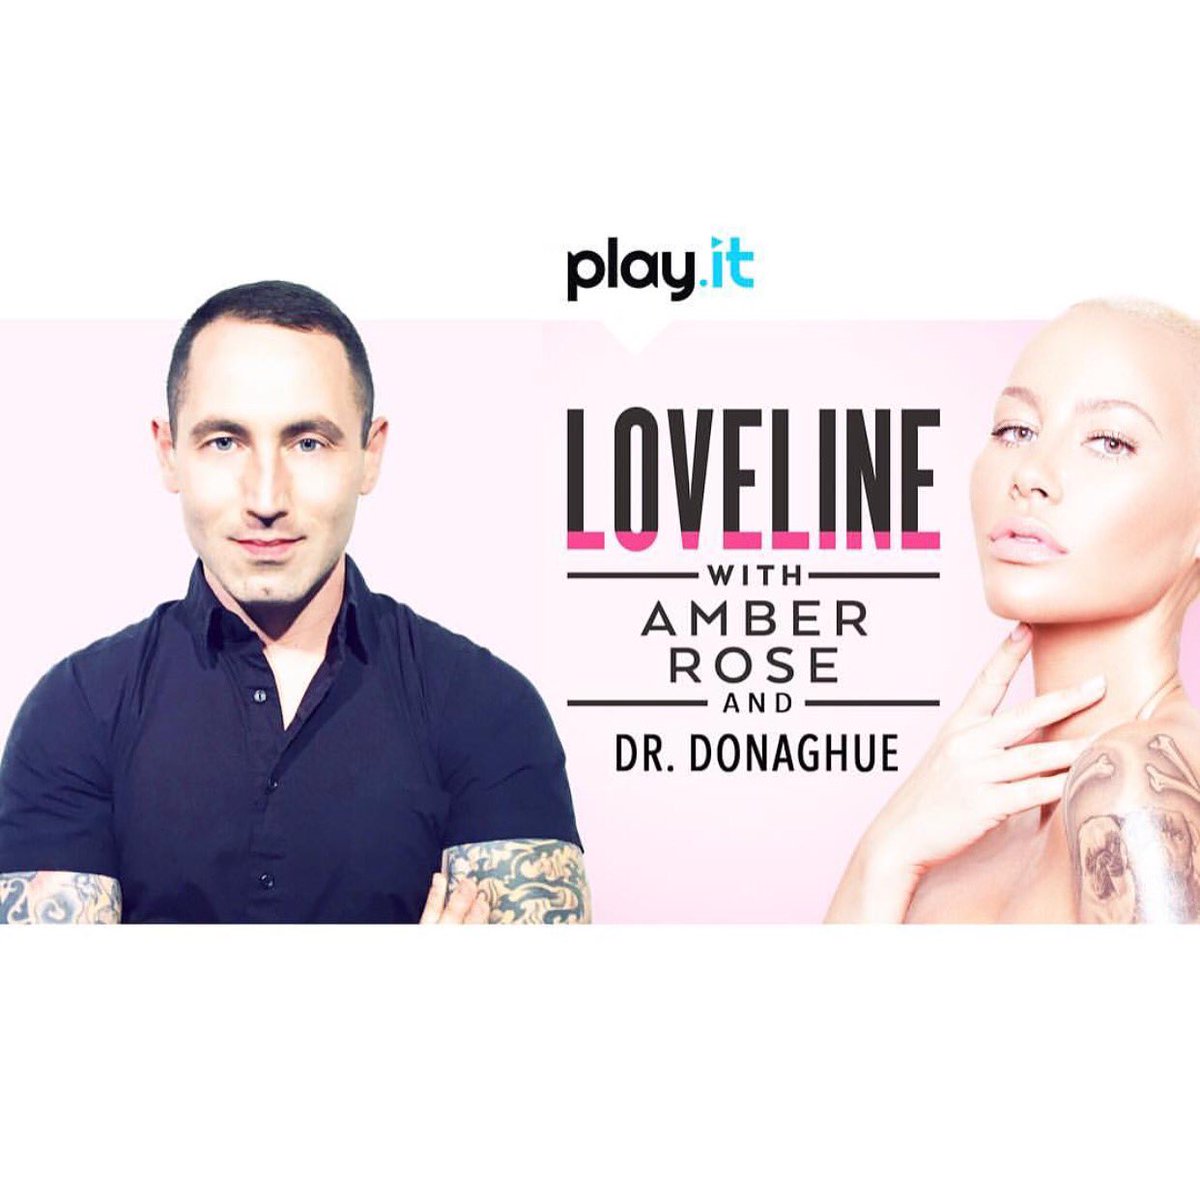 Our New Podcast #LoveLine airs tmrw!!! Subscribe NOW! @drdonaghue #fanart ❤️❤️❤️ https://t.co/vFOH6fLrXN